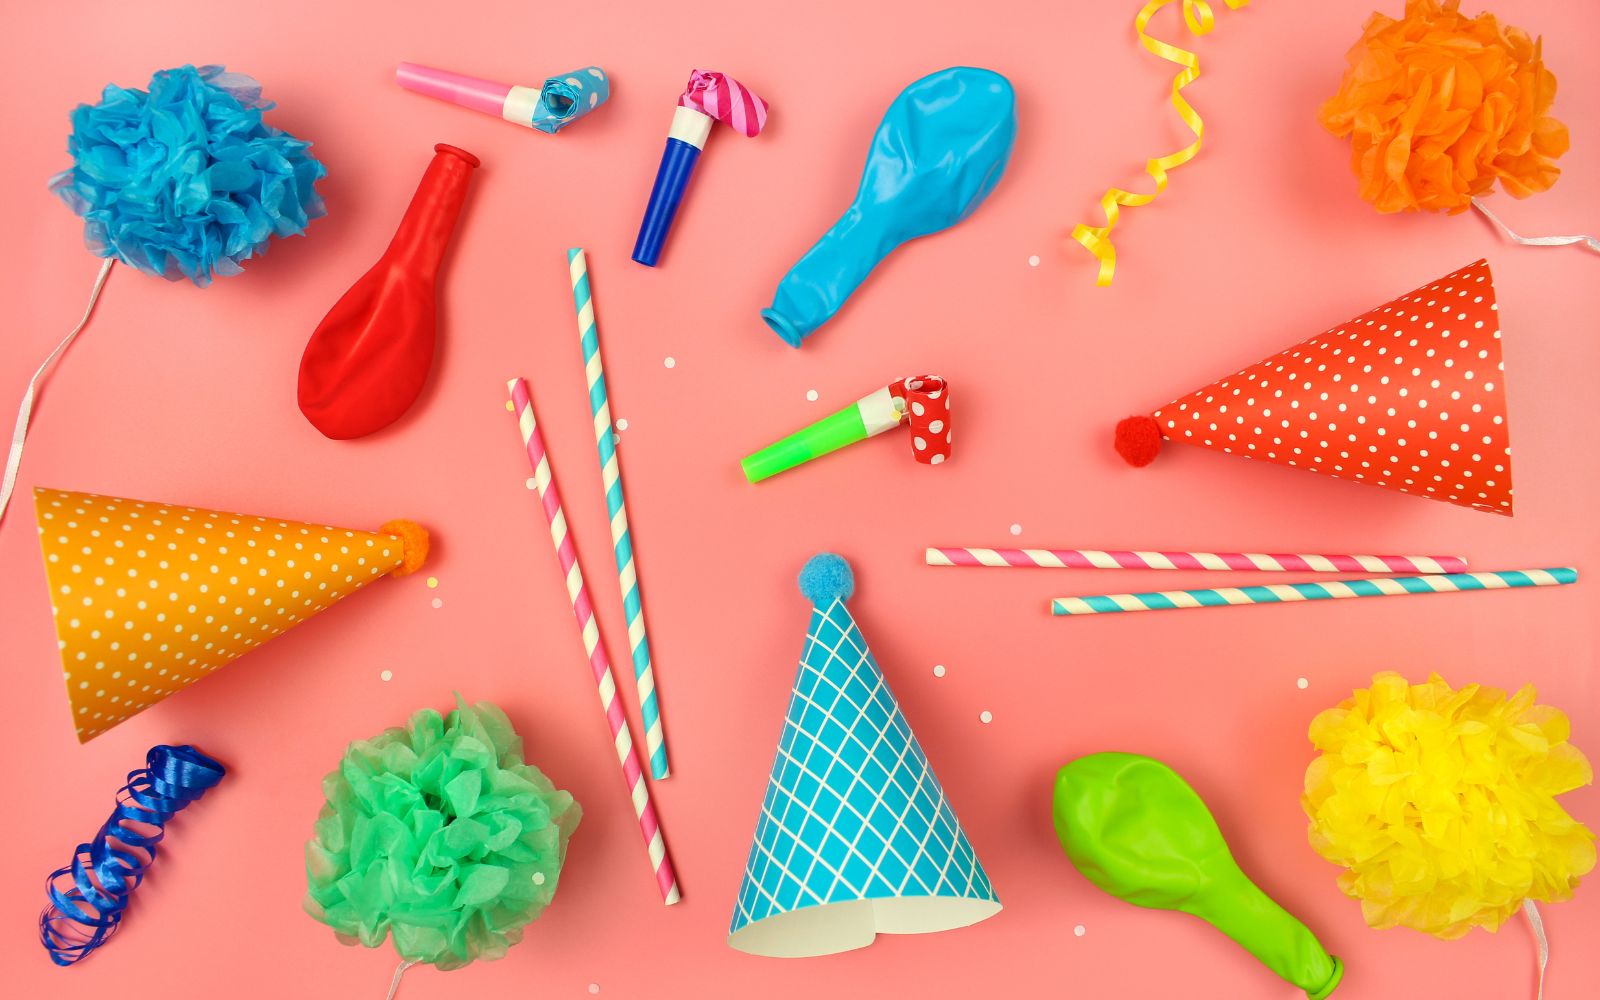 New Party Supplies Shopify Store Name Ideas.